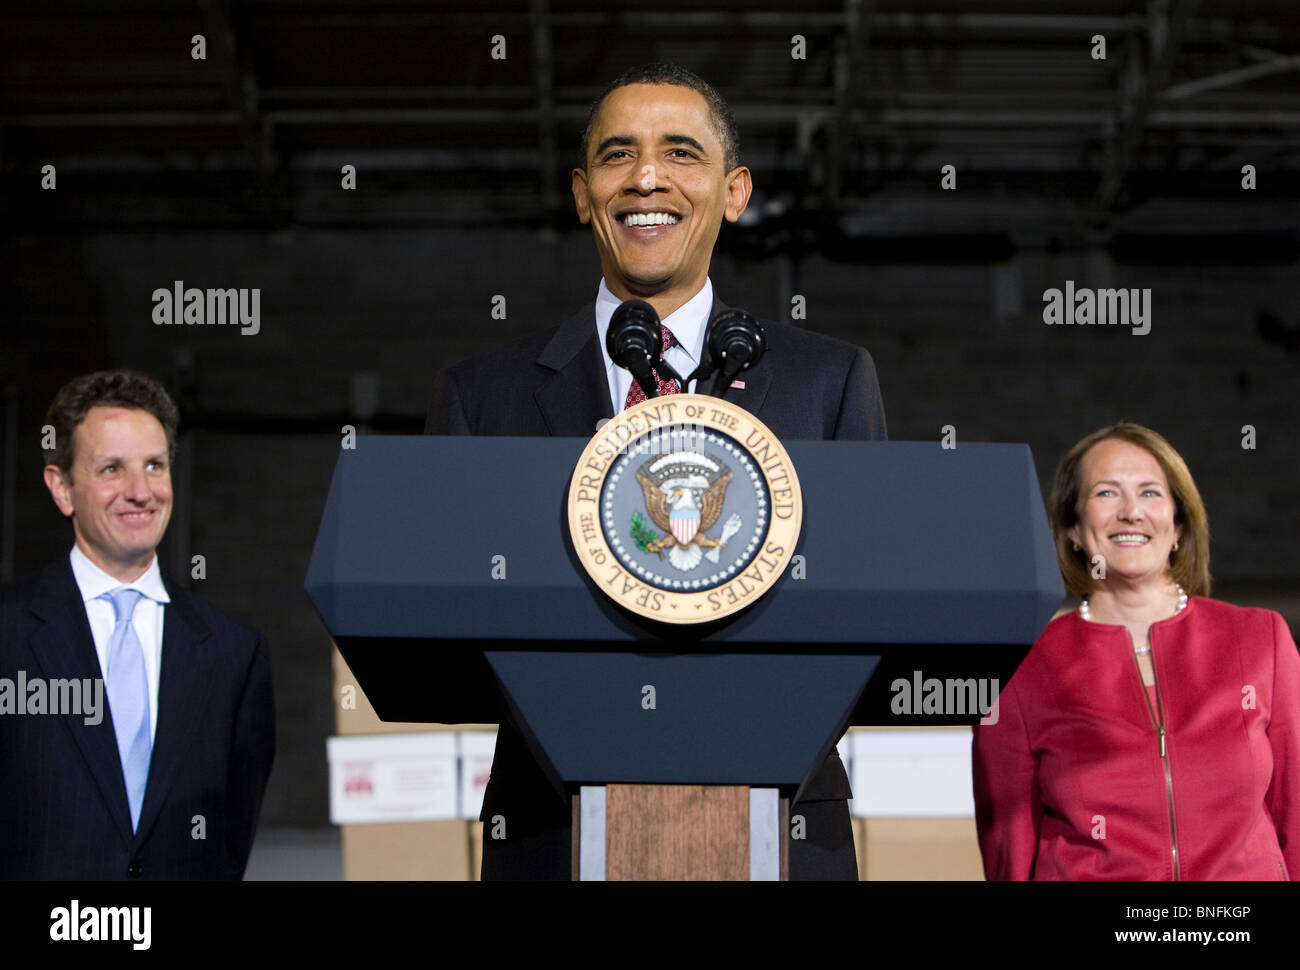 President Barack Obama Speaks at a storage warehouse to promote small business. Stock Photo